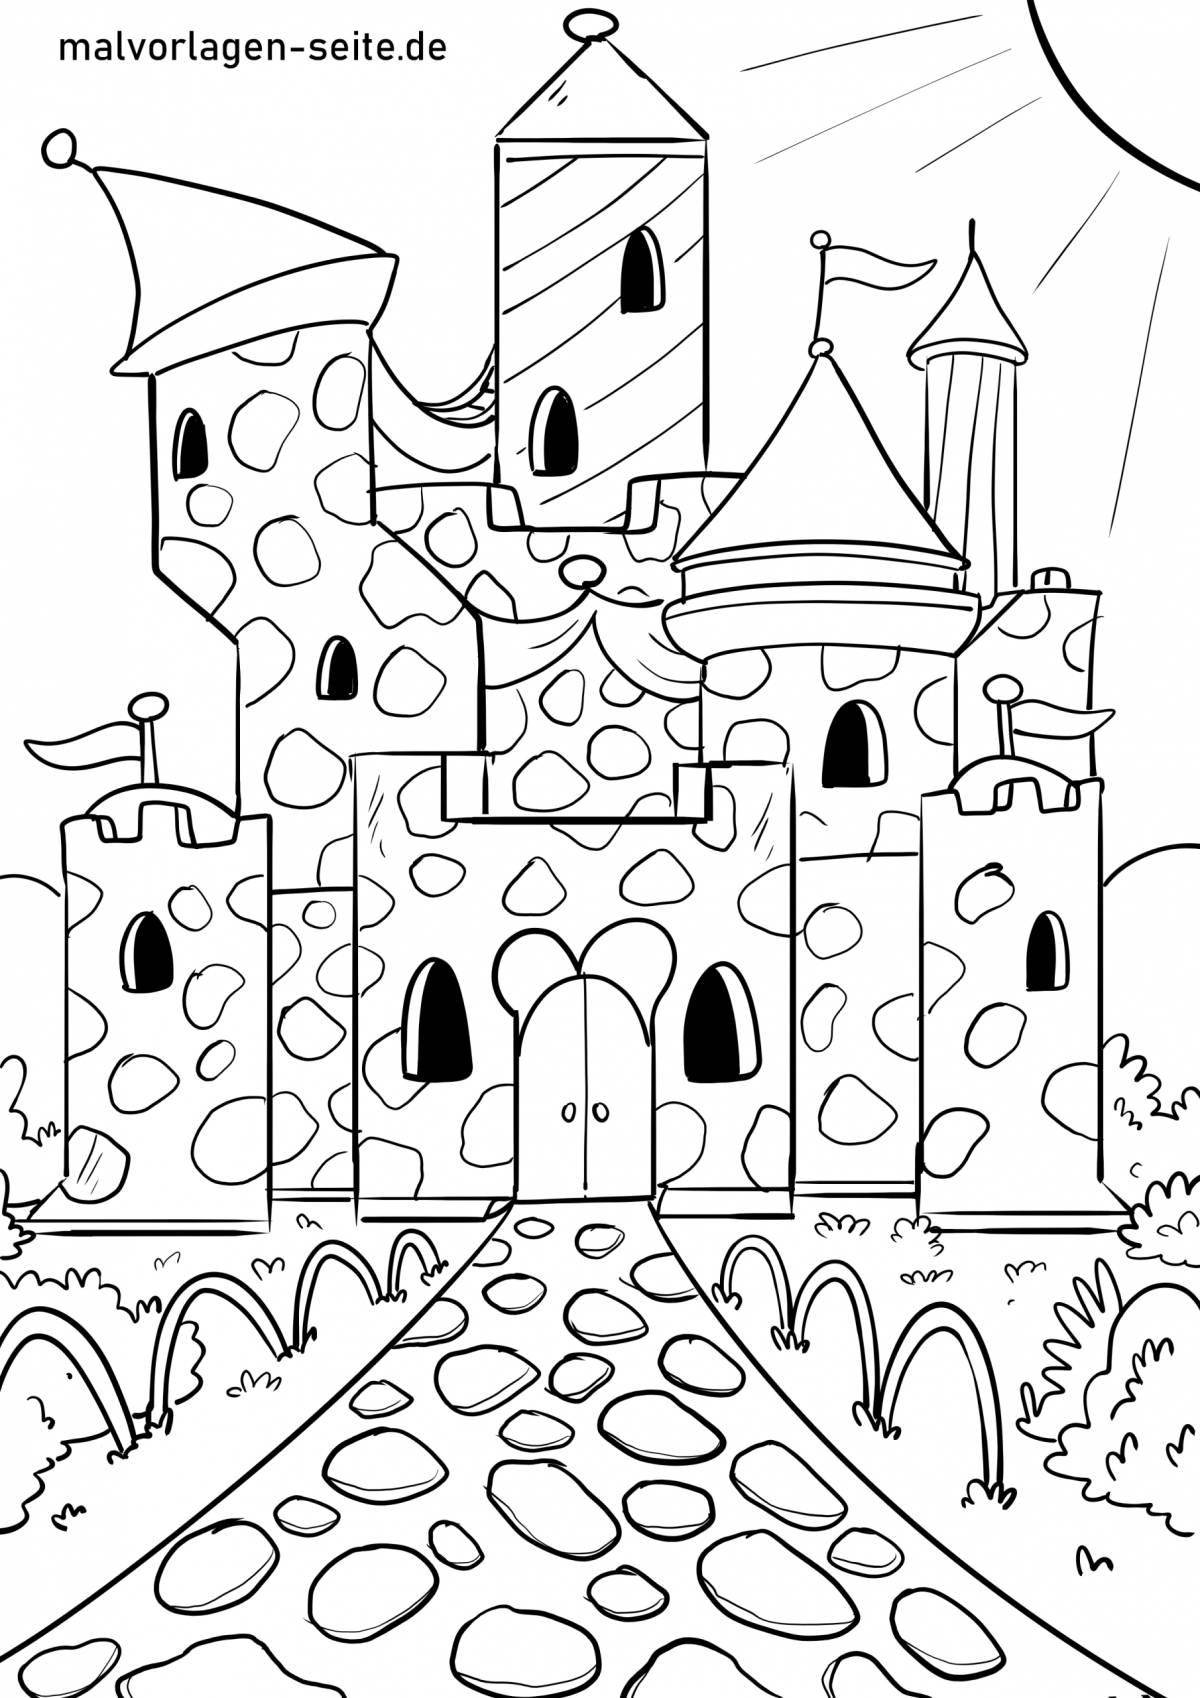 Exquisite palace coloring pages for kids